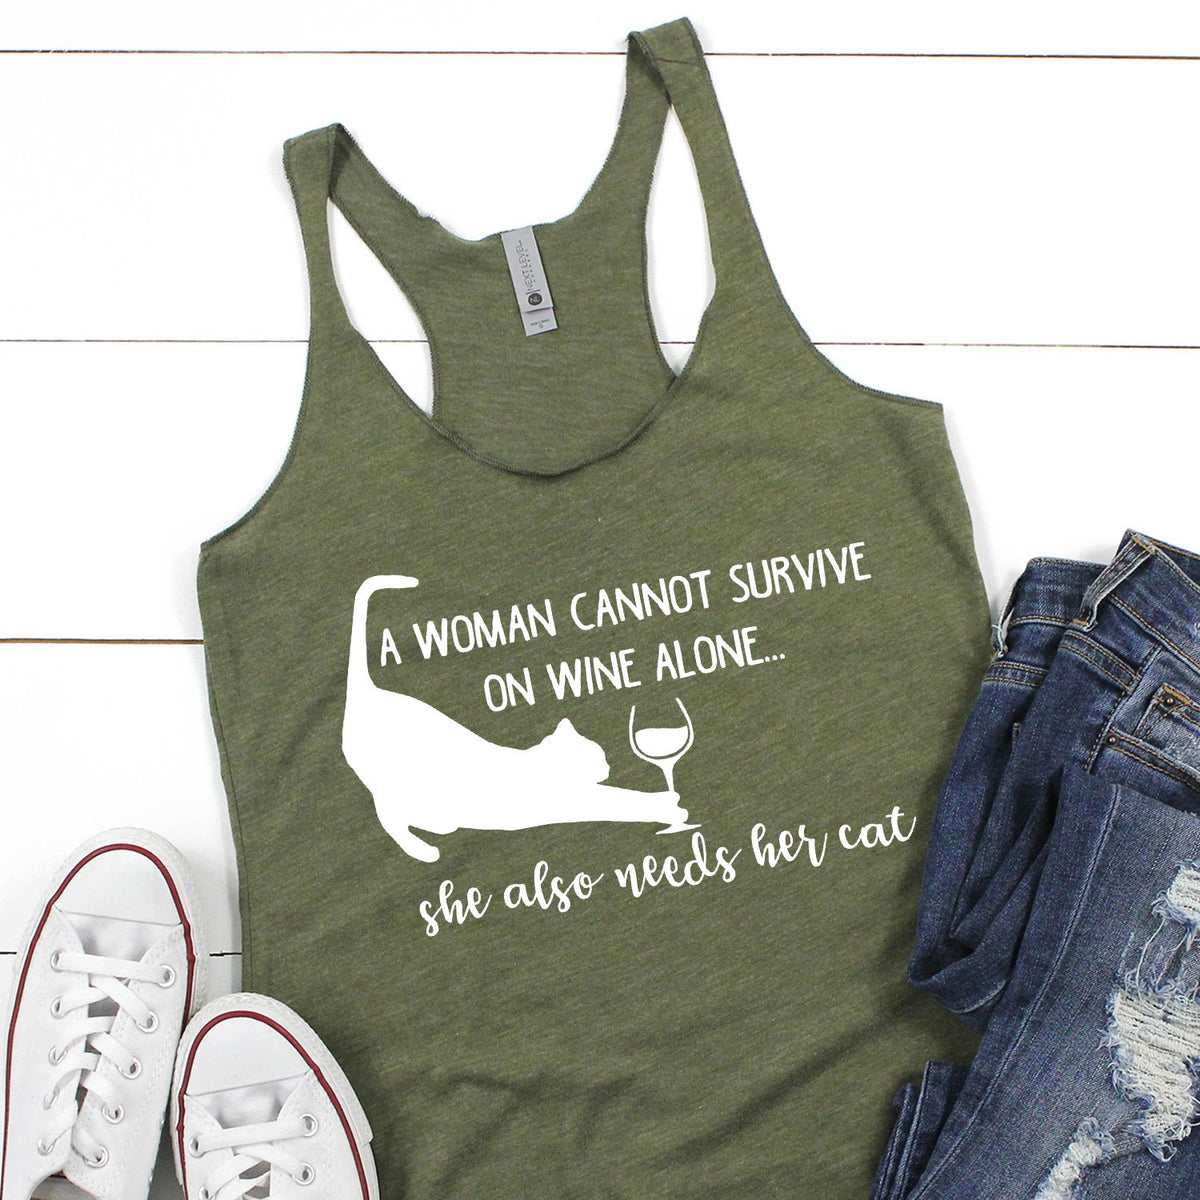 A Woman Cannot Survive on Wine Alone, She also Needs her Cat - Tank Top Racerback